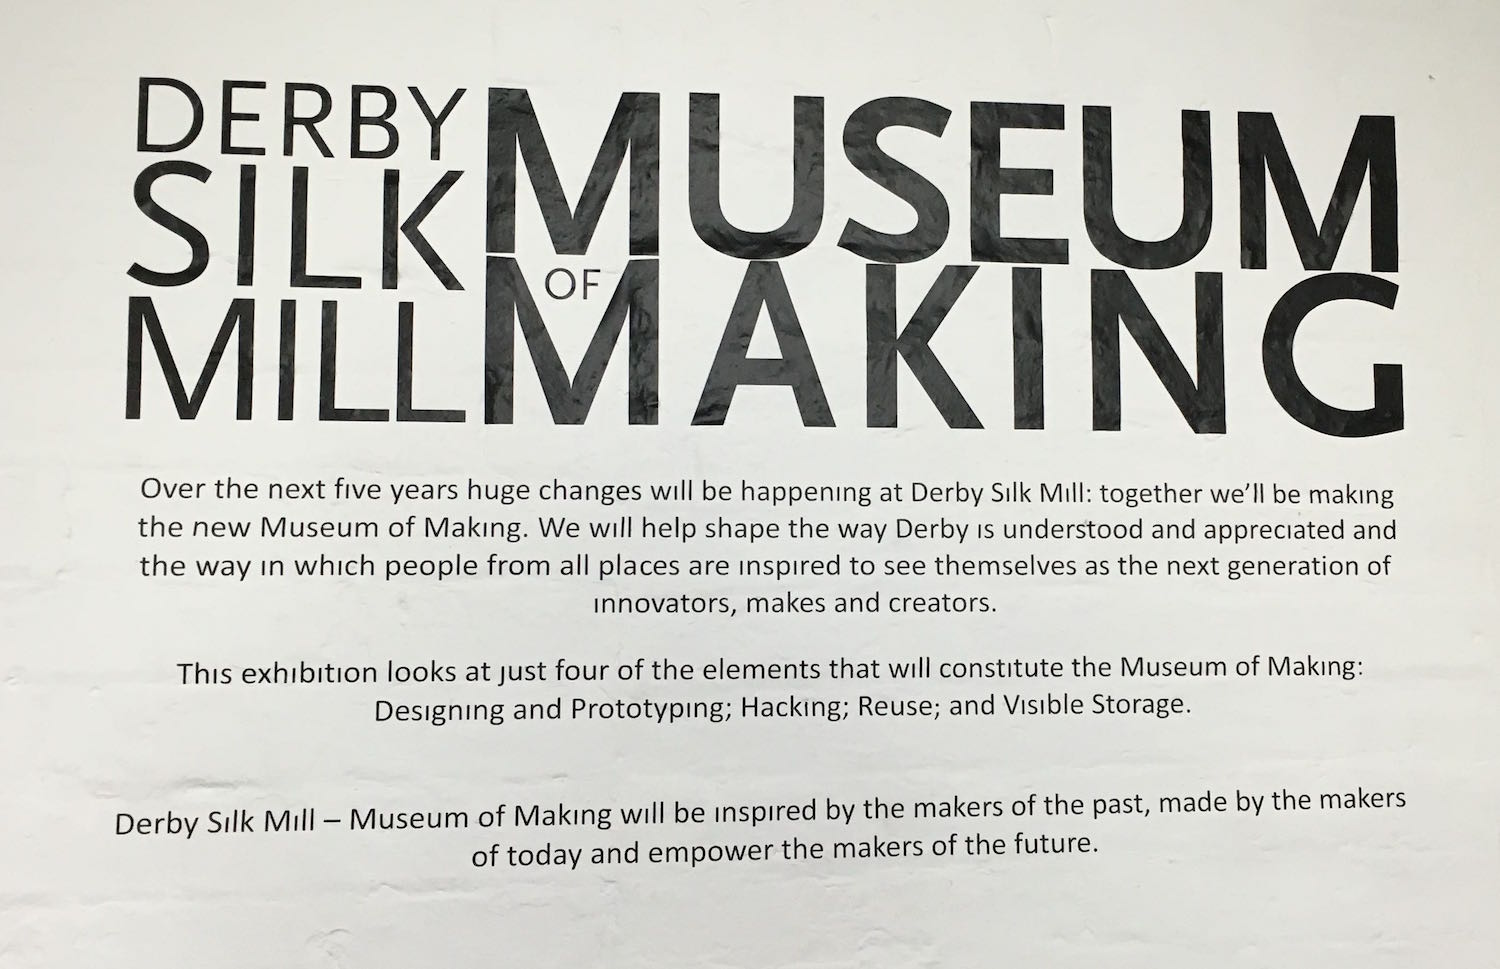 Derby Museum of Making sign on a wall. It reads 'Derby Silk Mill Museum of Making: Over the next five years huge changes will be happening at Derby Silk Mill. Together we’ll be making the new Museum of Making. We will help shape the way Derby is understood and appreciated and the way in which people fro all places are inspired to see themselves as the next generation of innovators, makers and creators.'